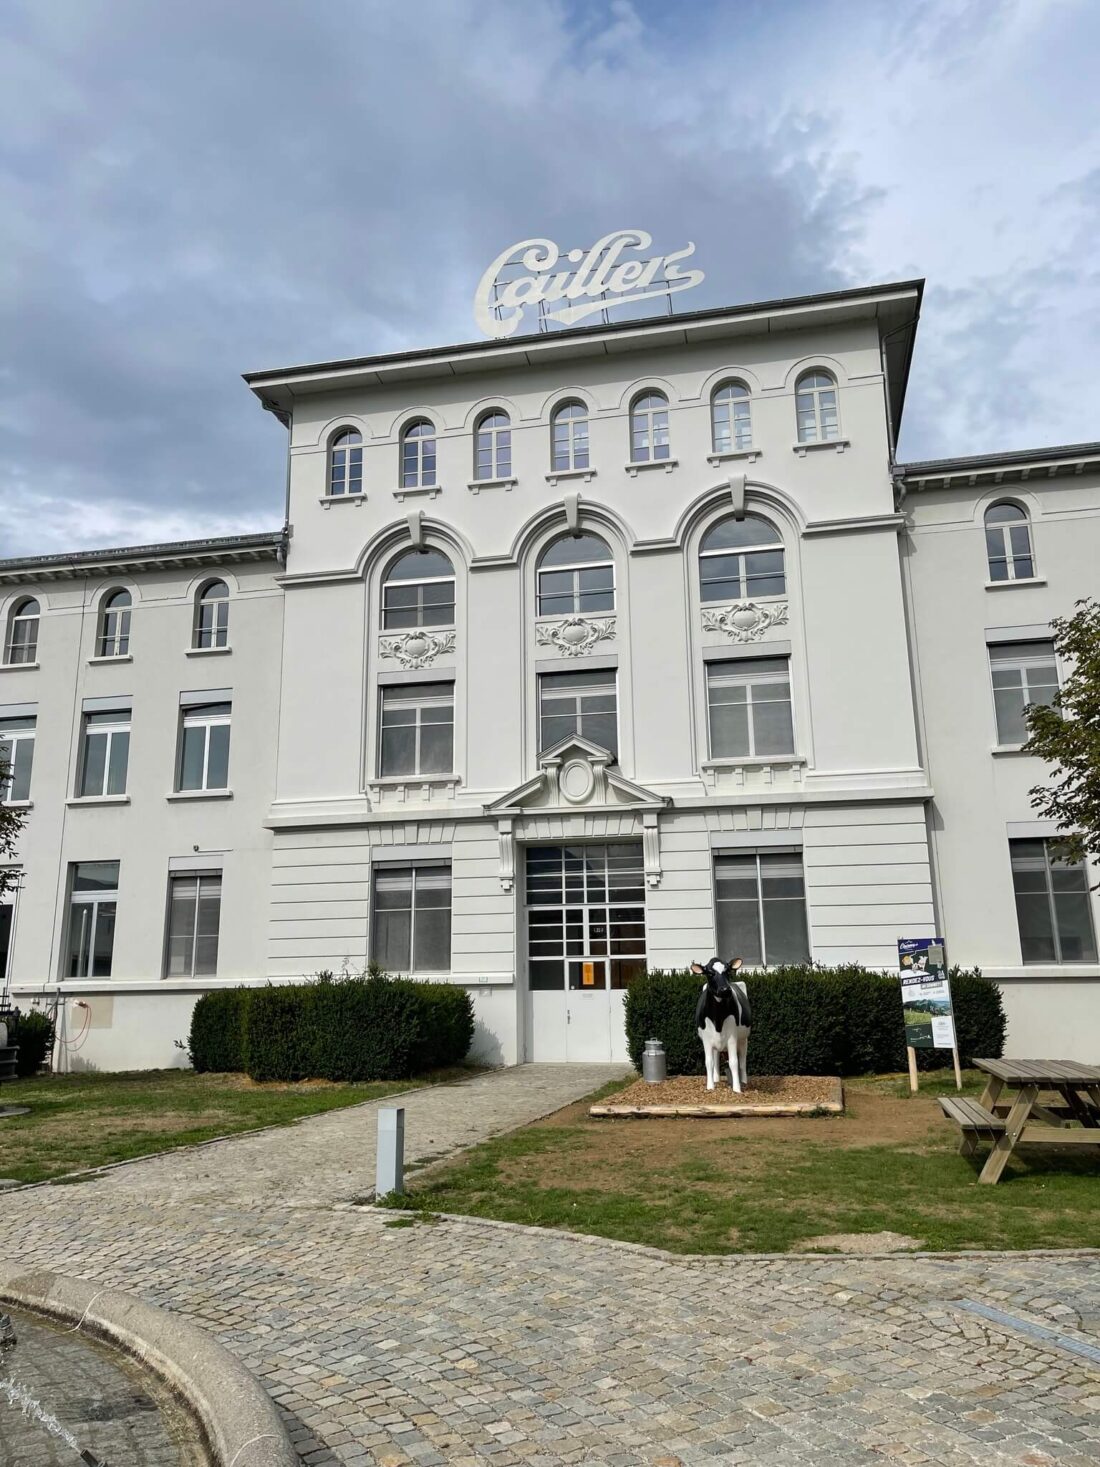 Exterior of Maison Cailler chocolate factory